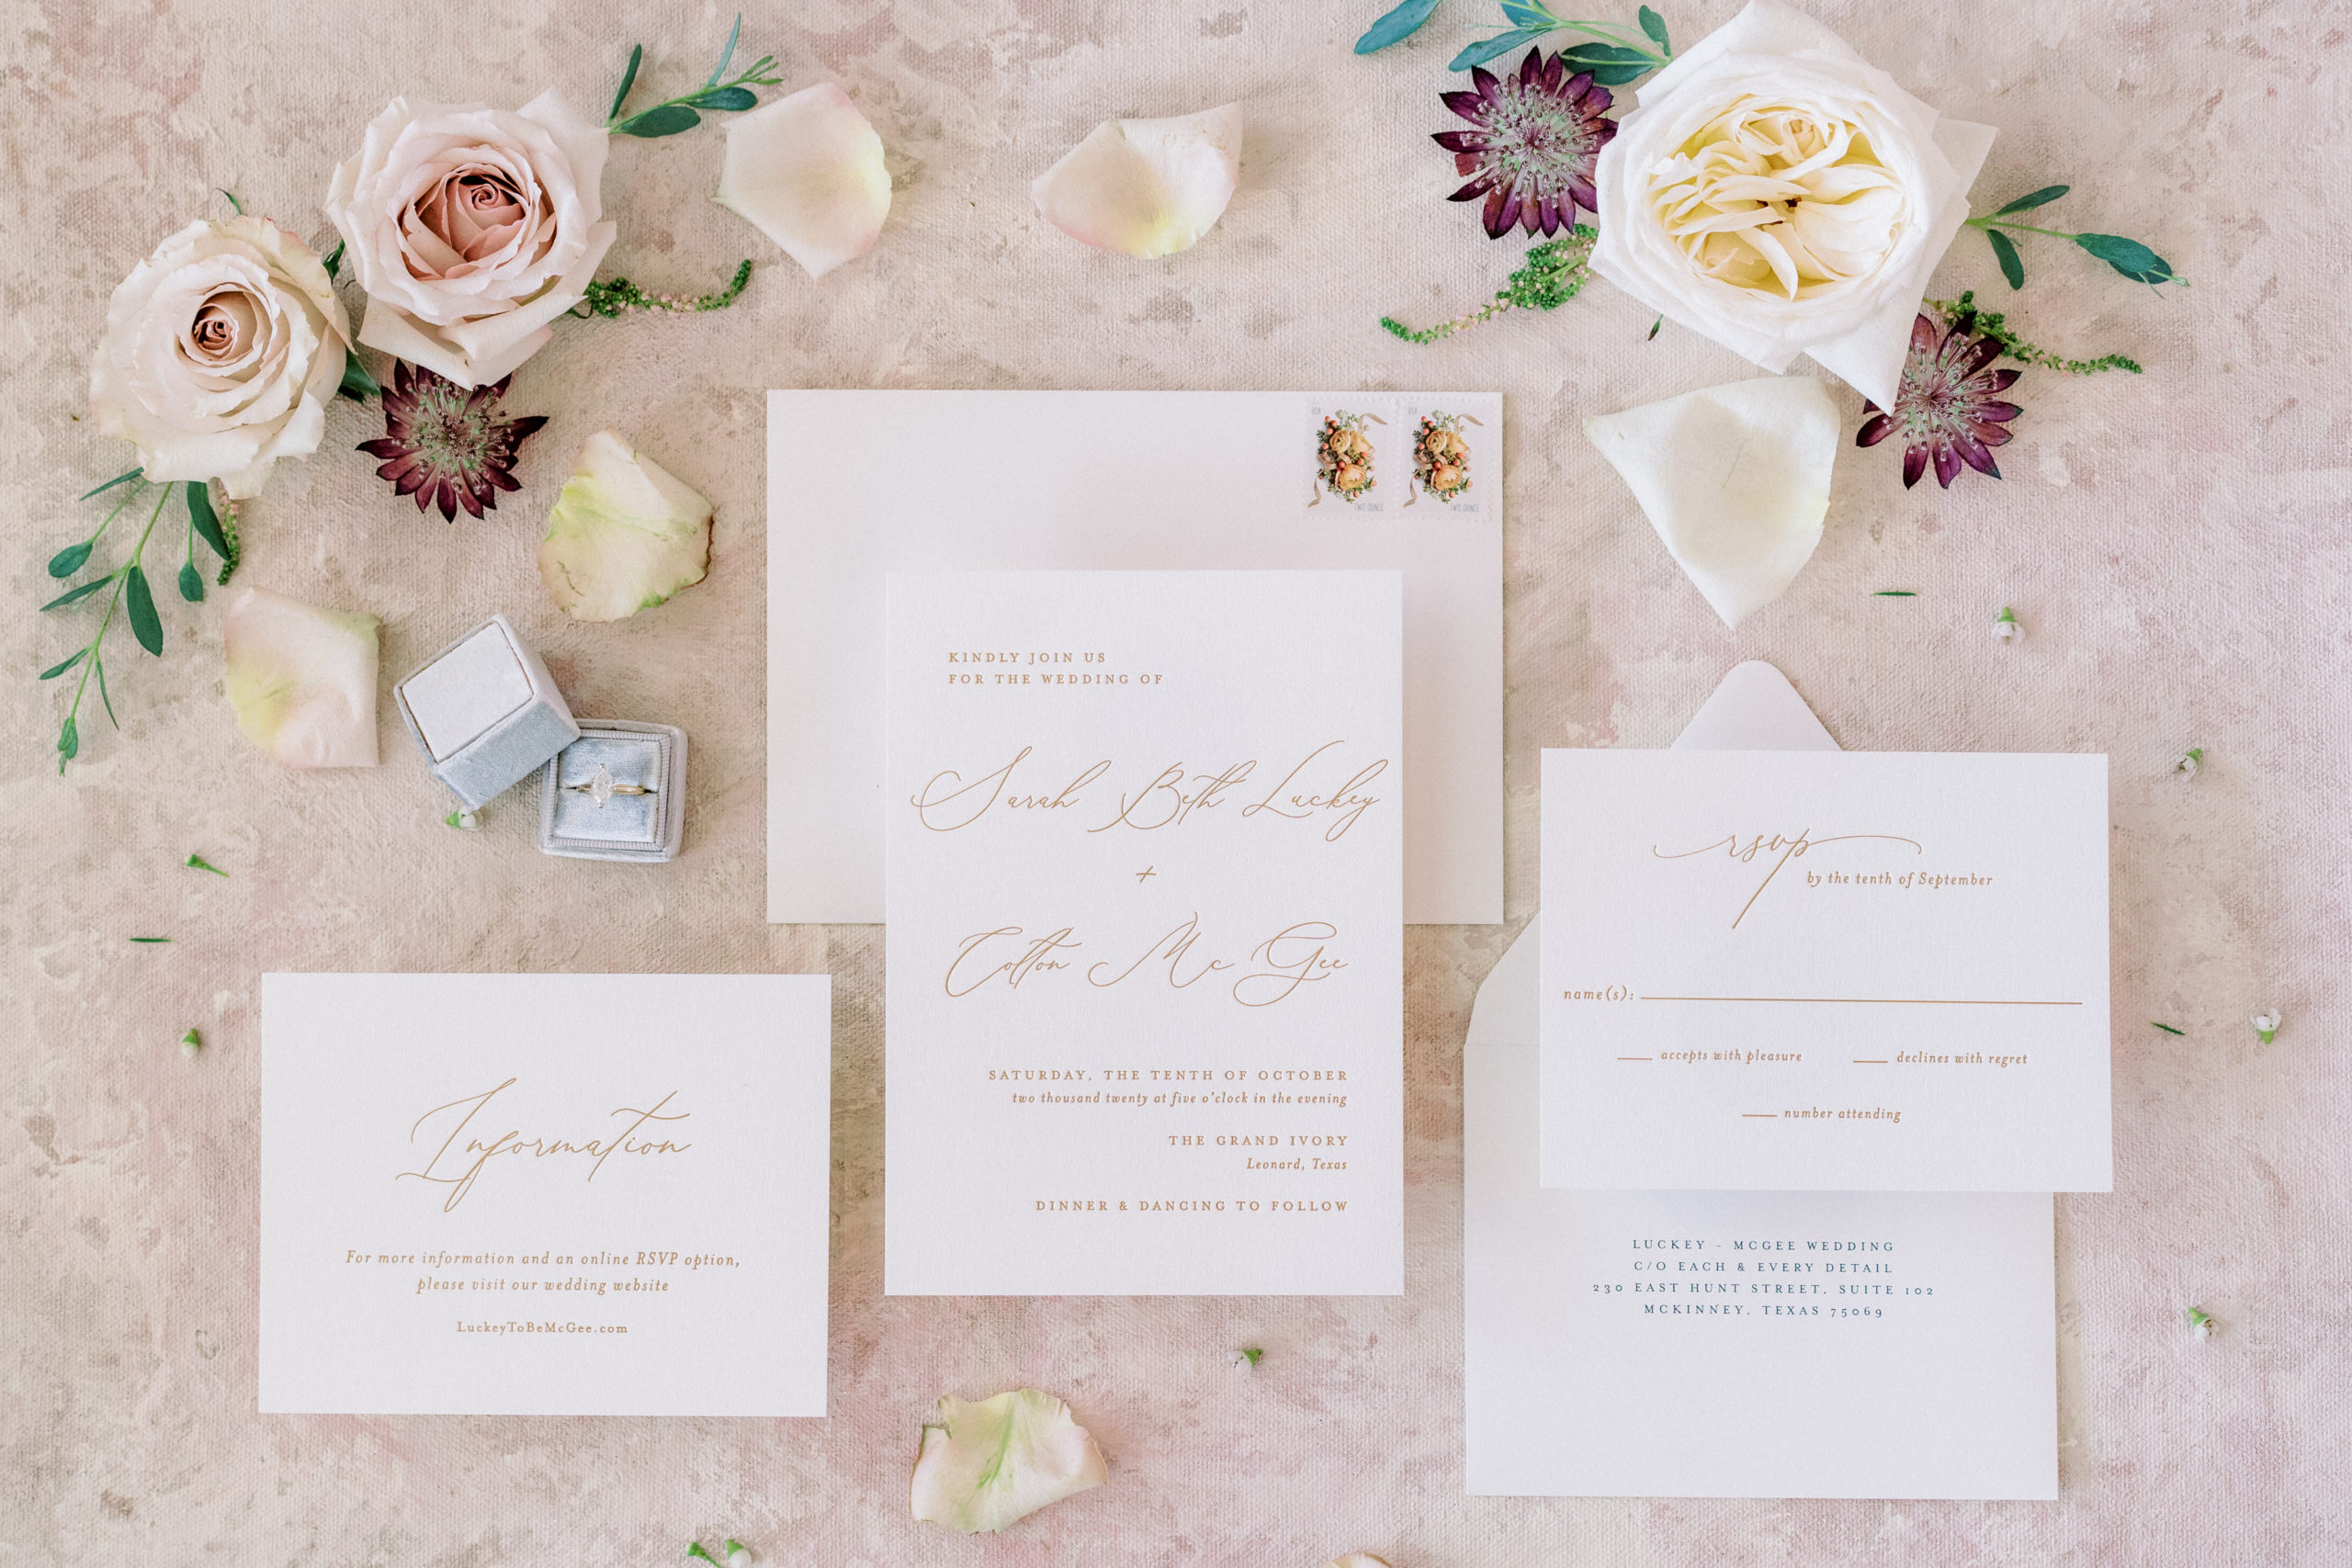 blush invitation flat lay with florals